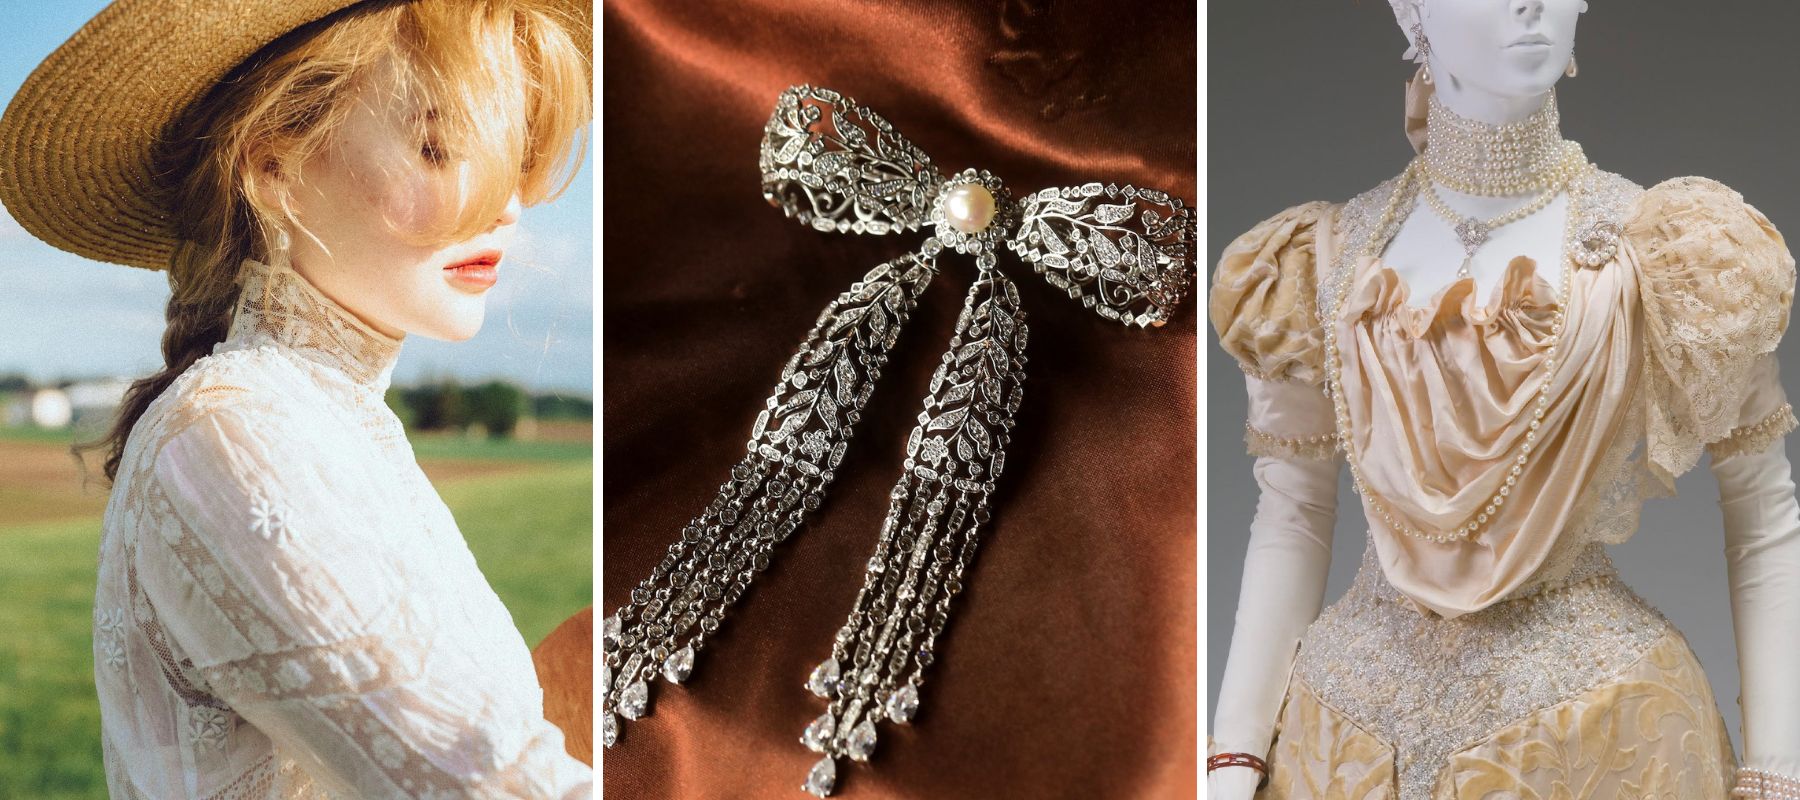 The Roots Of Cottagecore: What jewelry was popular in 1890s?